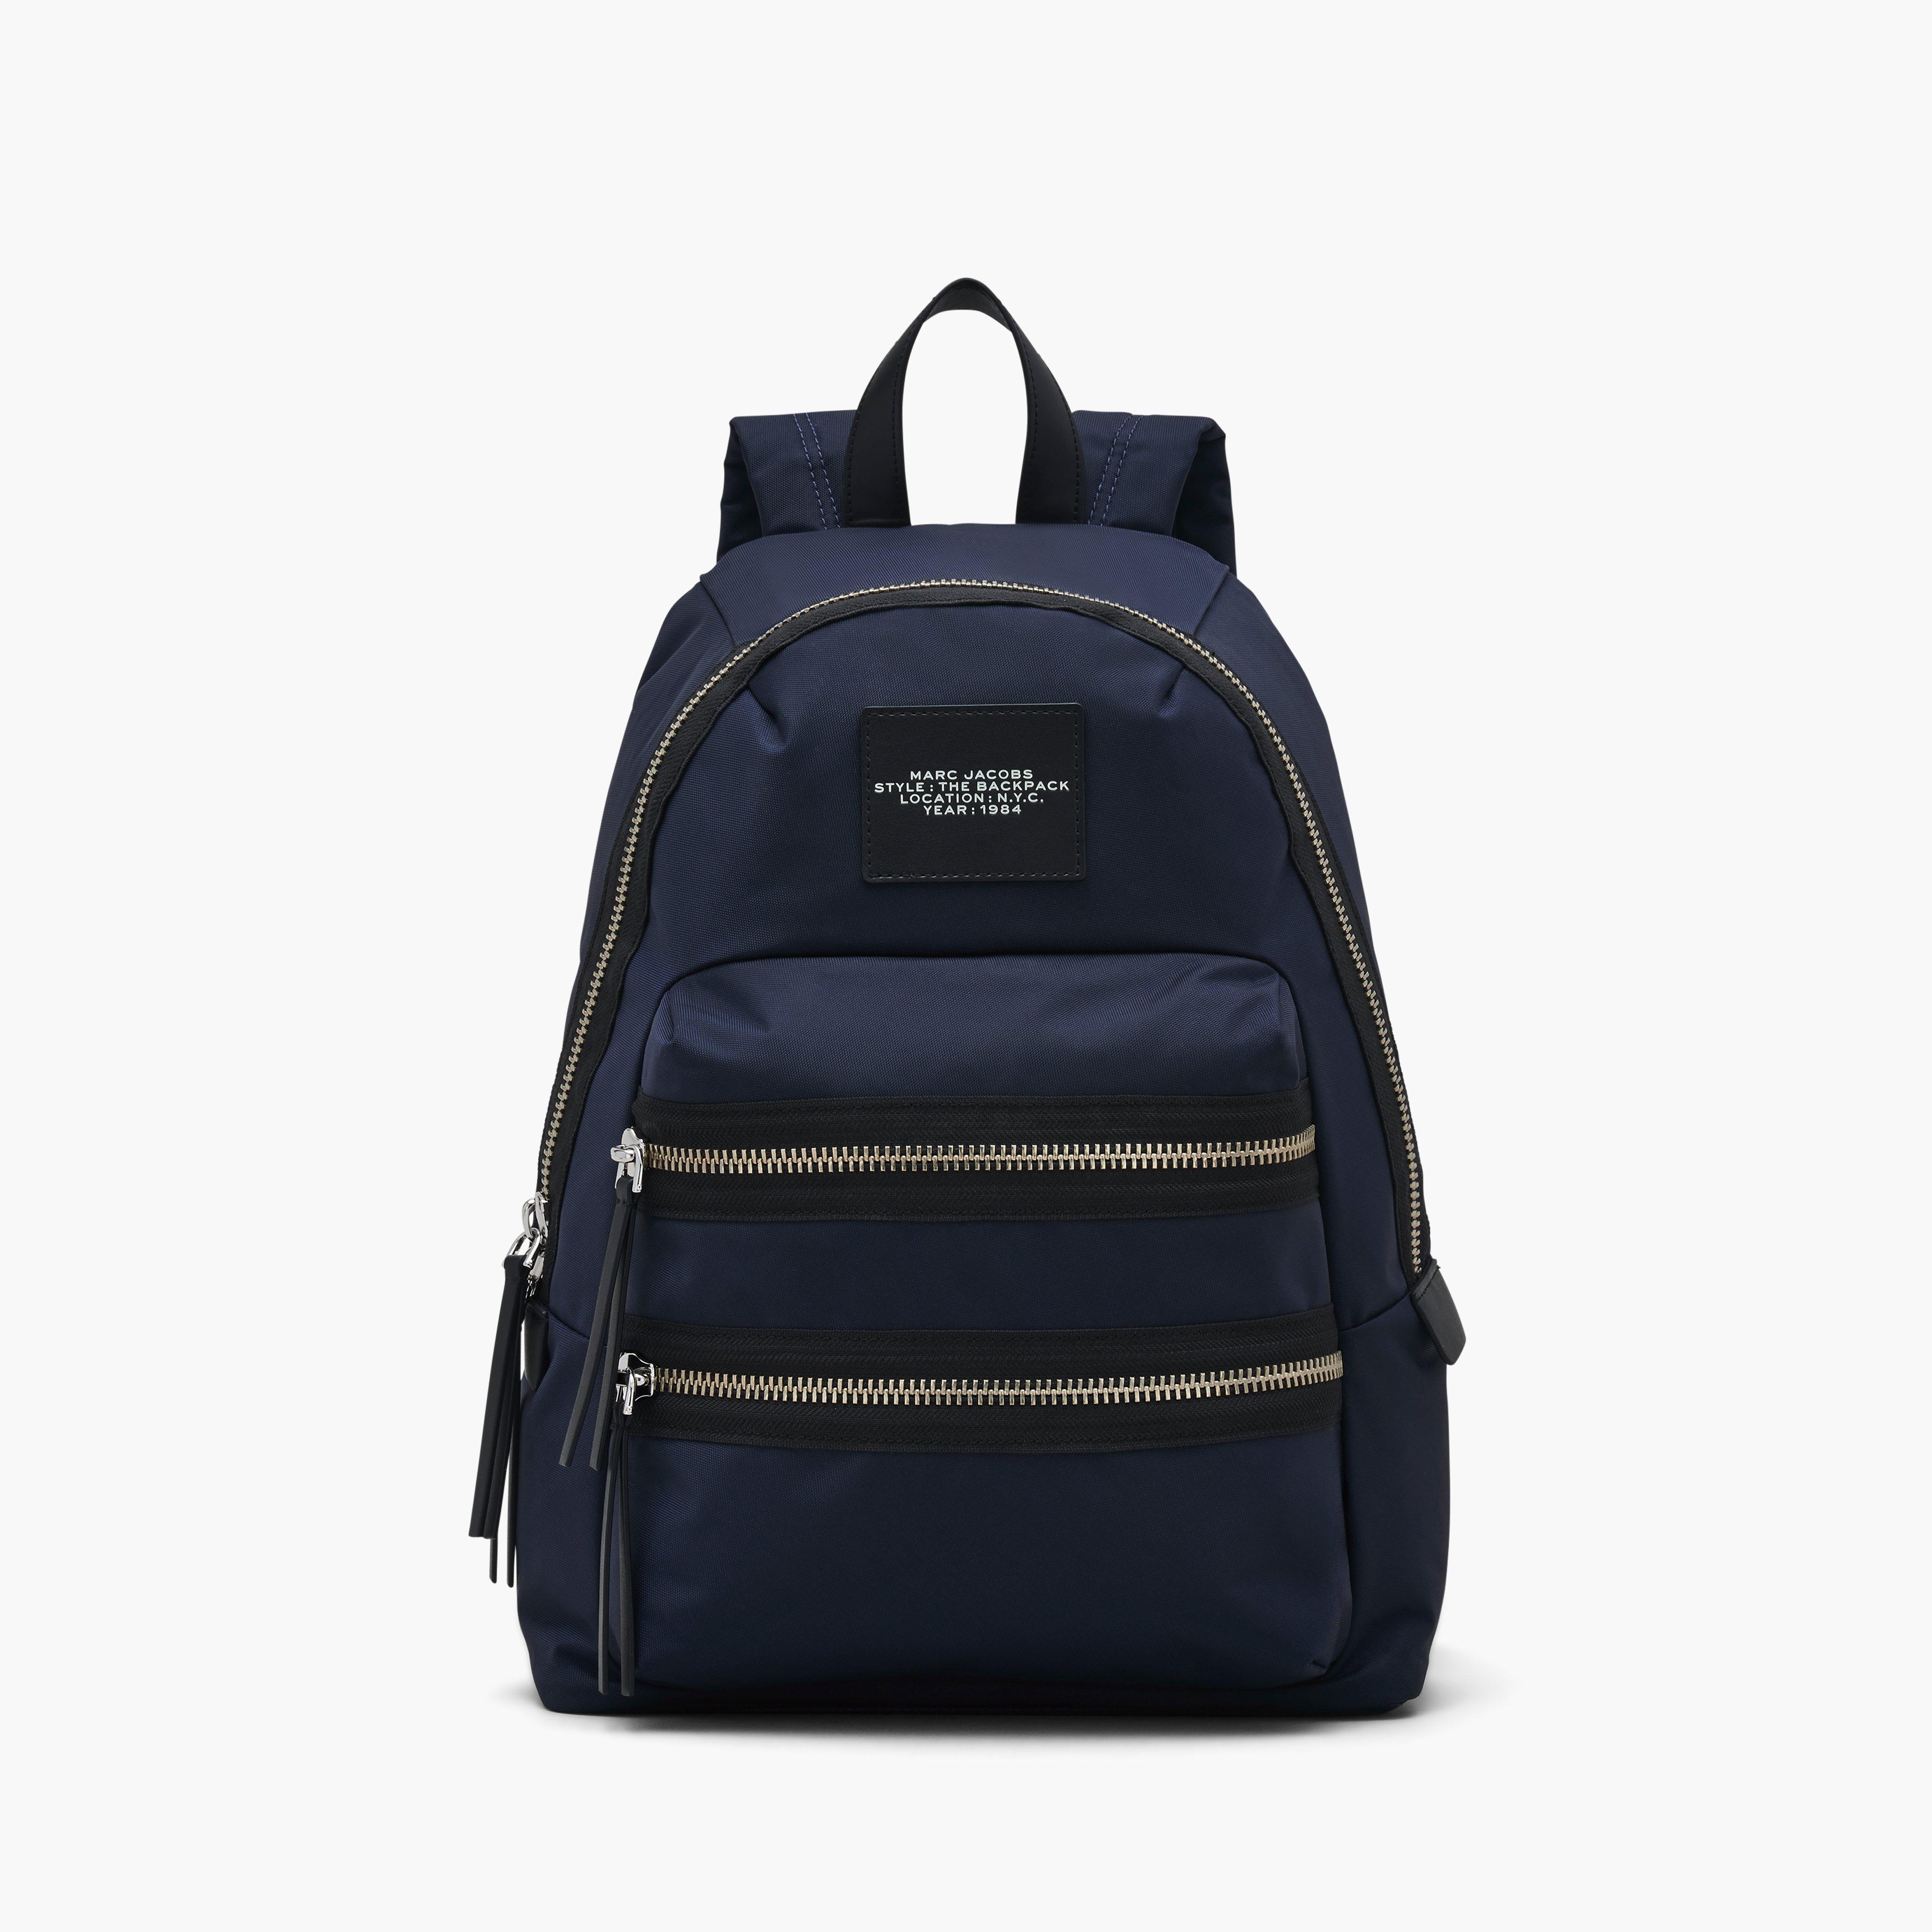 Marc by Marc jacobs The Biker Nylon Large Backpack,MIDNIGHT BLUE